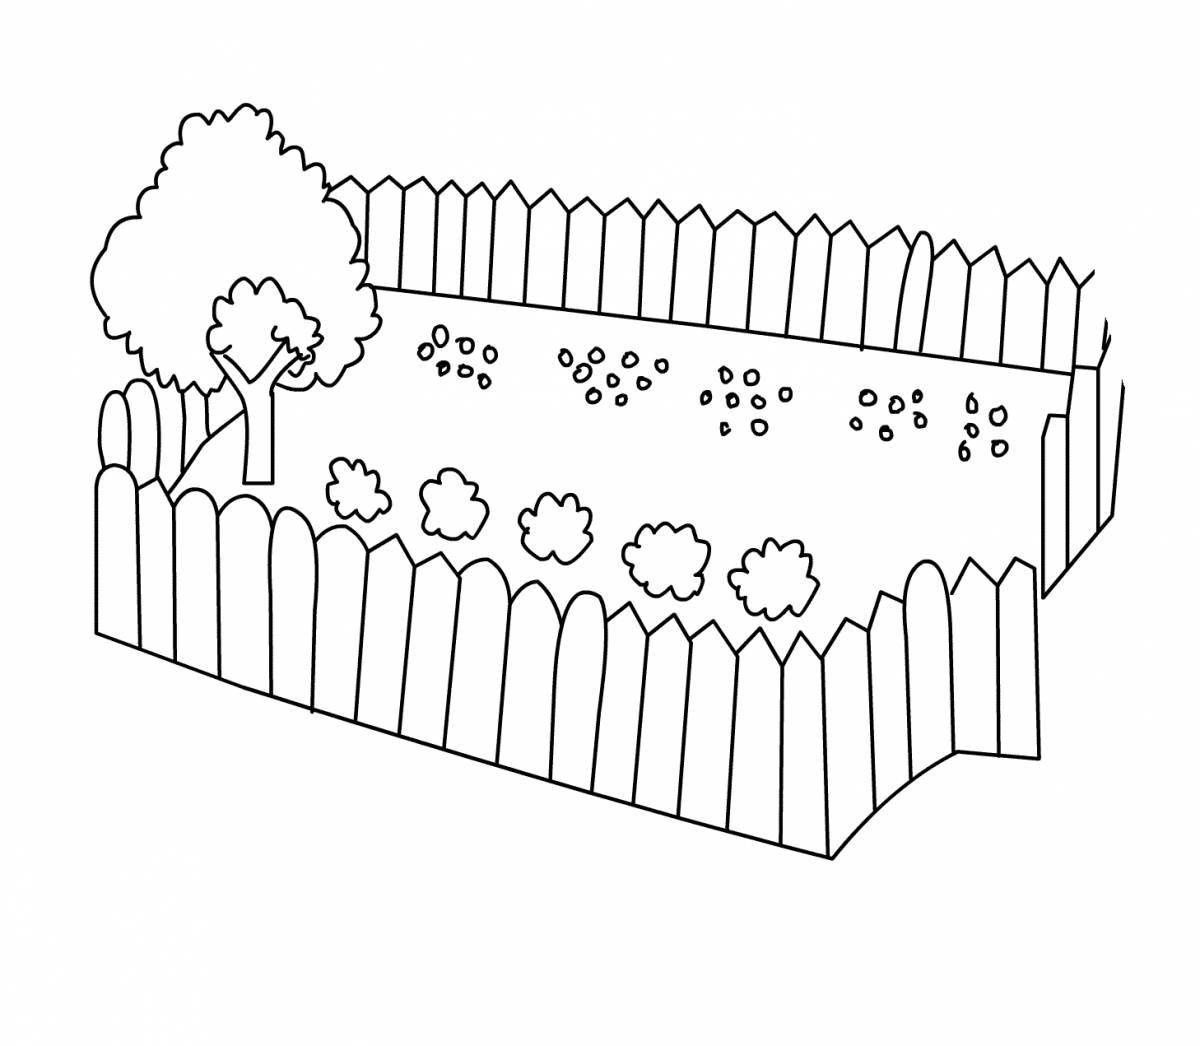 Glamorous fence coloring page for preschoolers